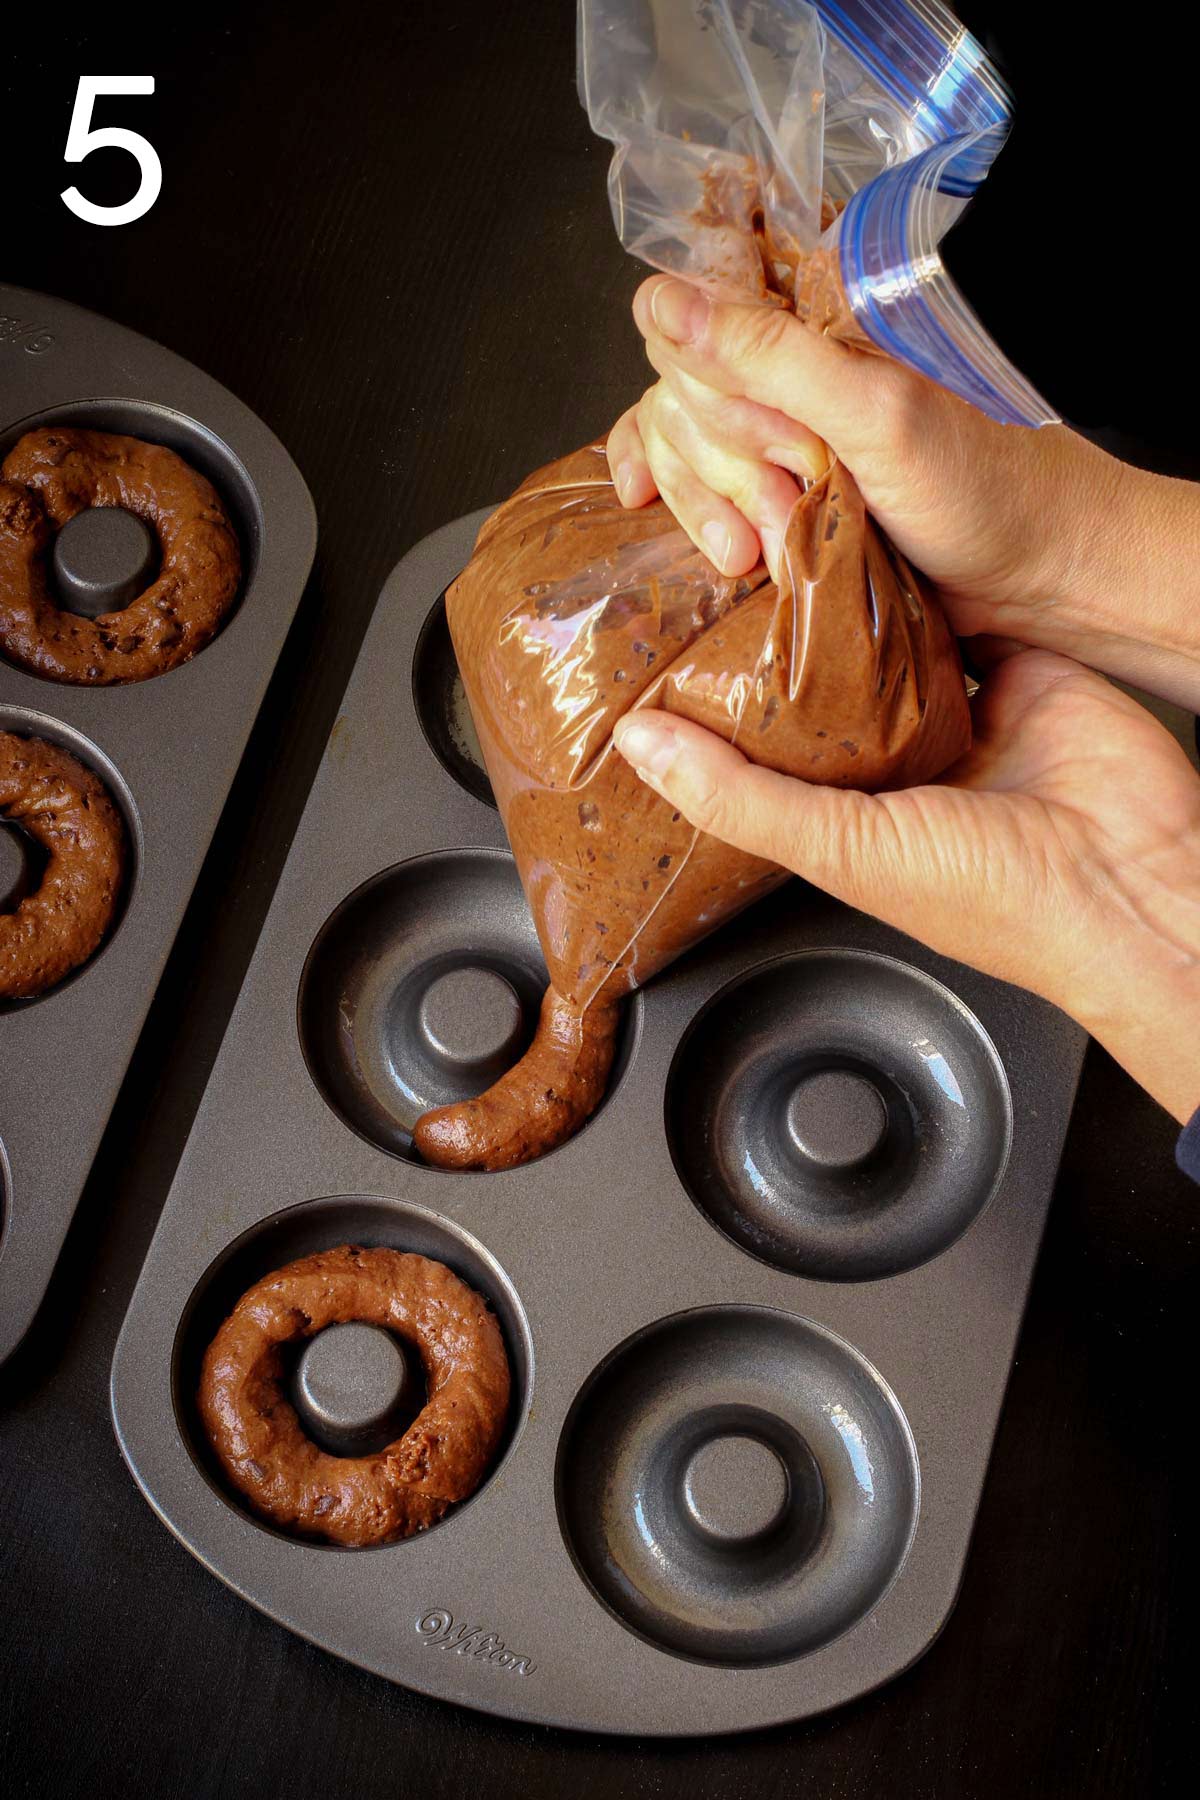 piping chocolate donut batter into greased donut pans.